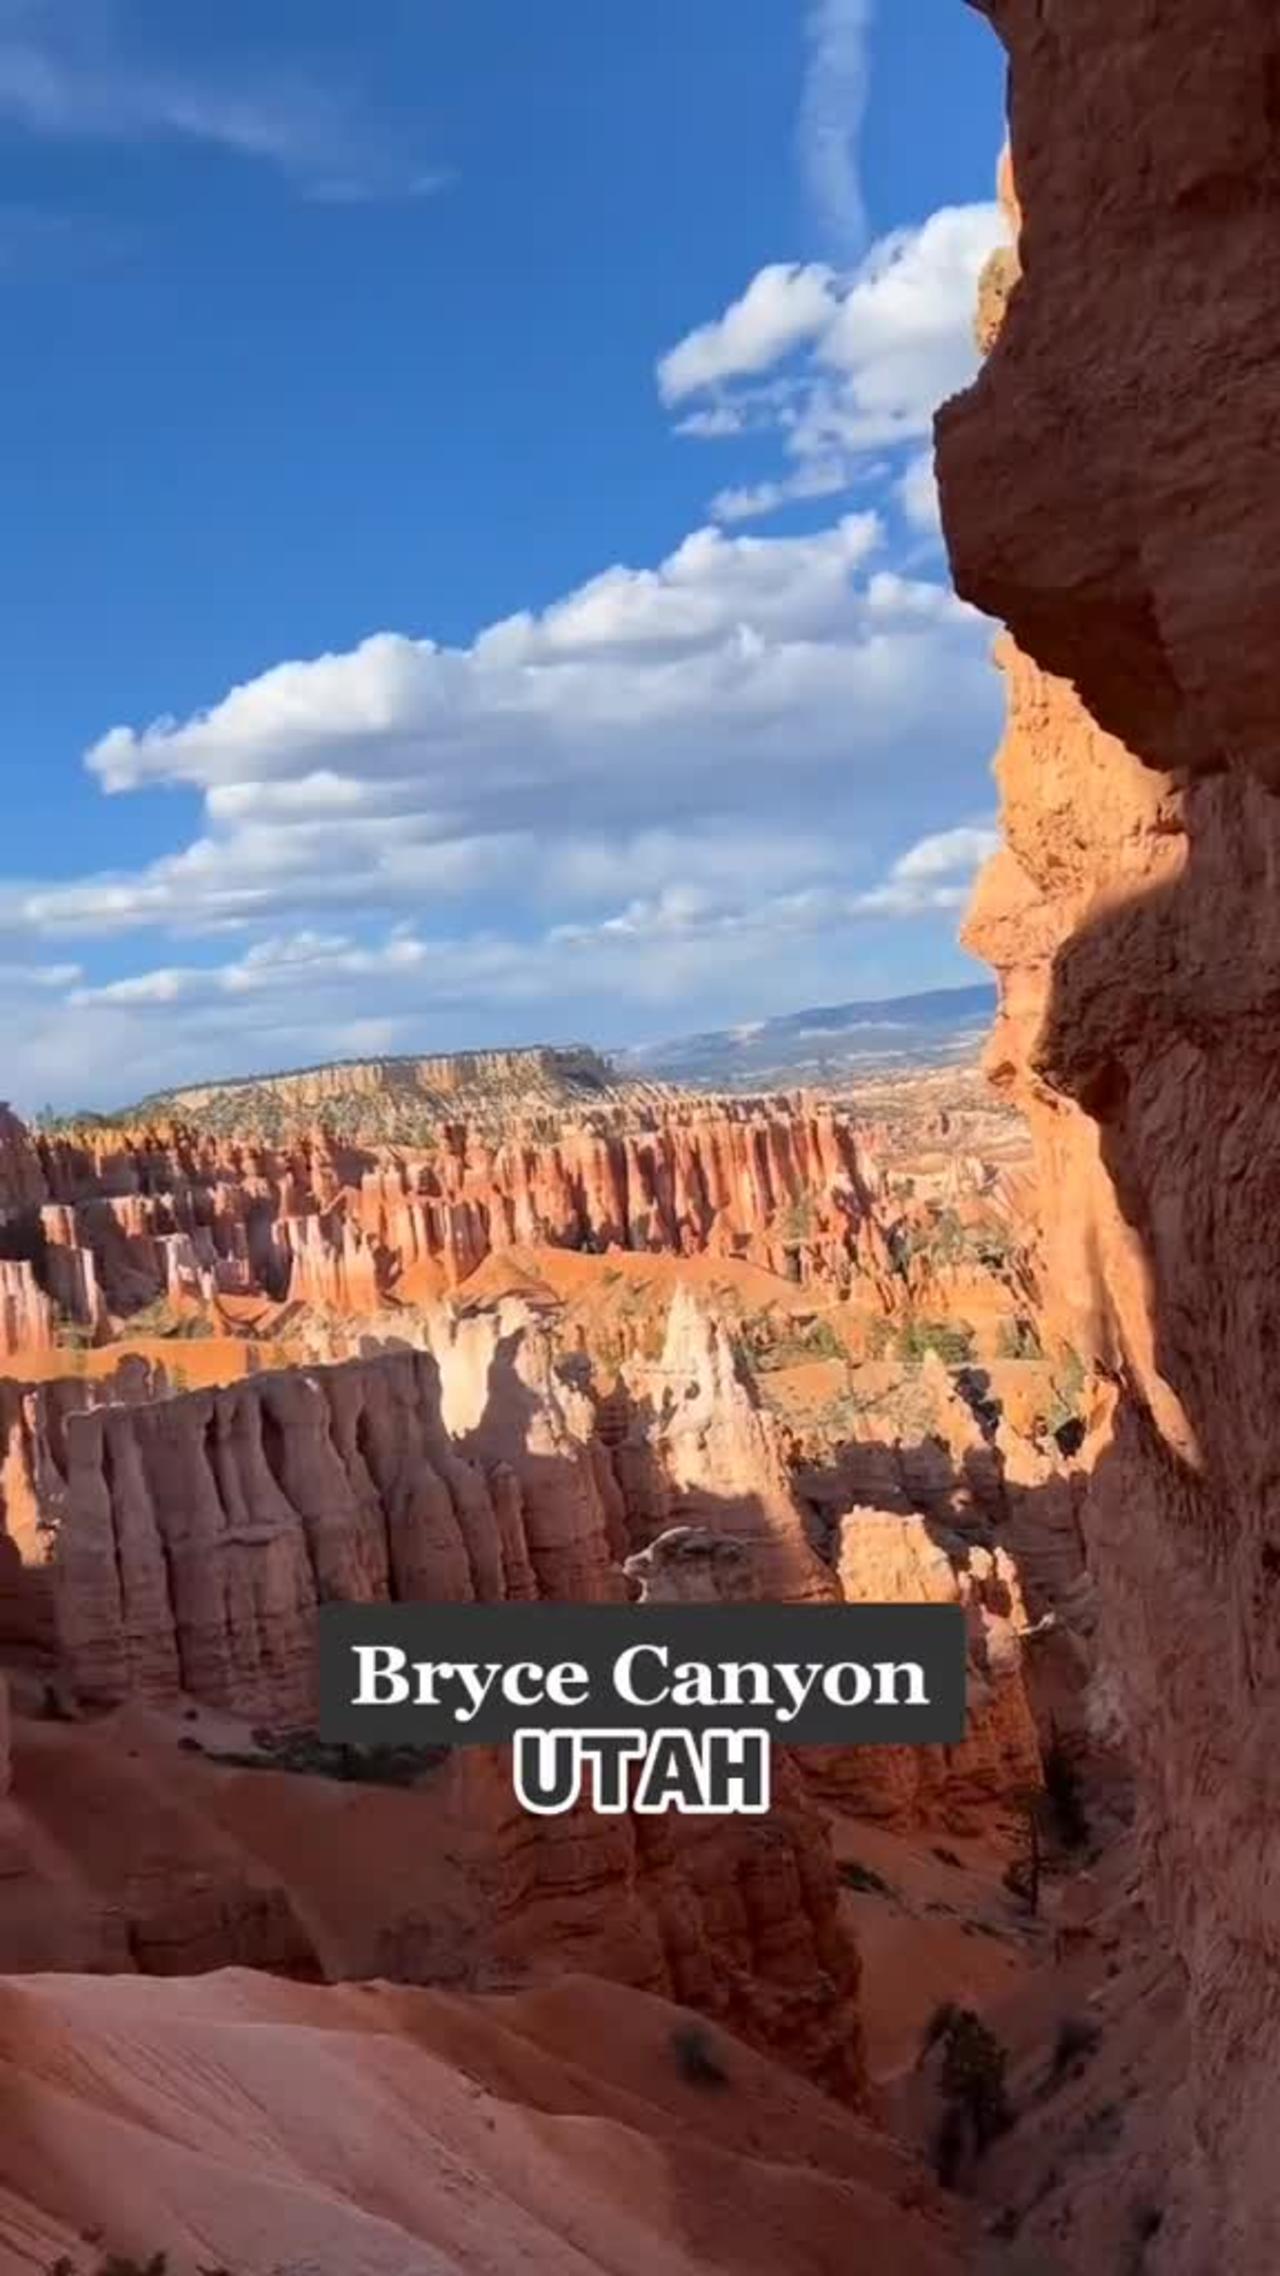 Bryce Canyon National Park, a sprawling reserve in southern Utah